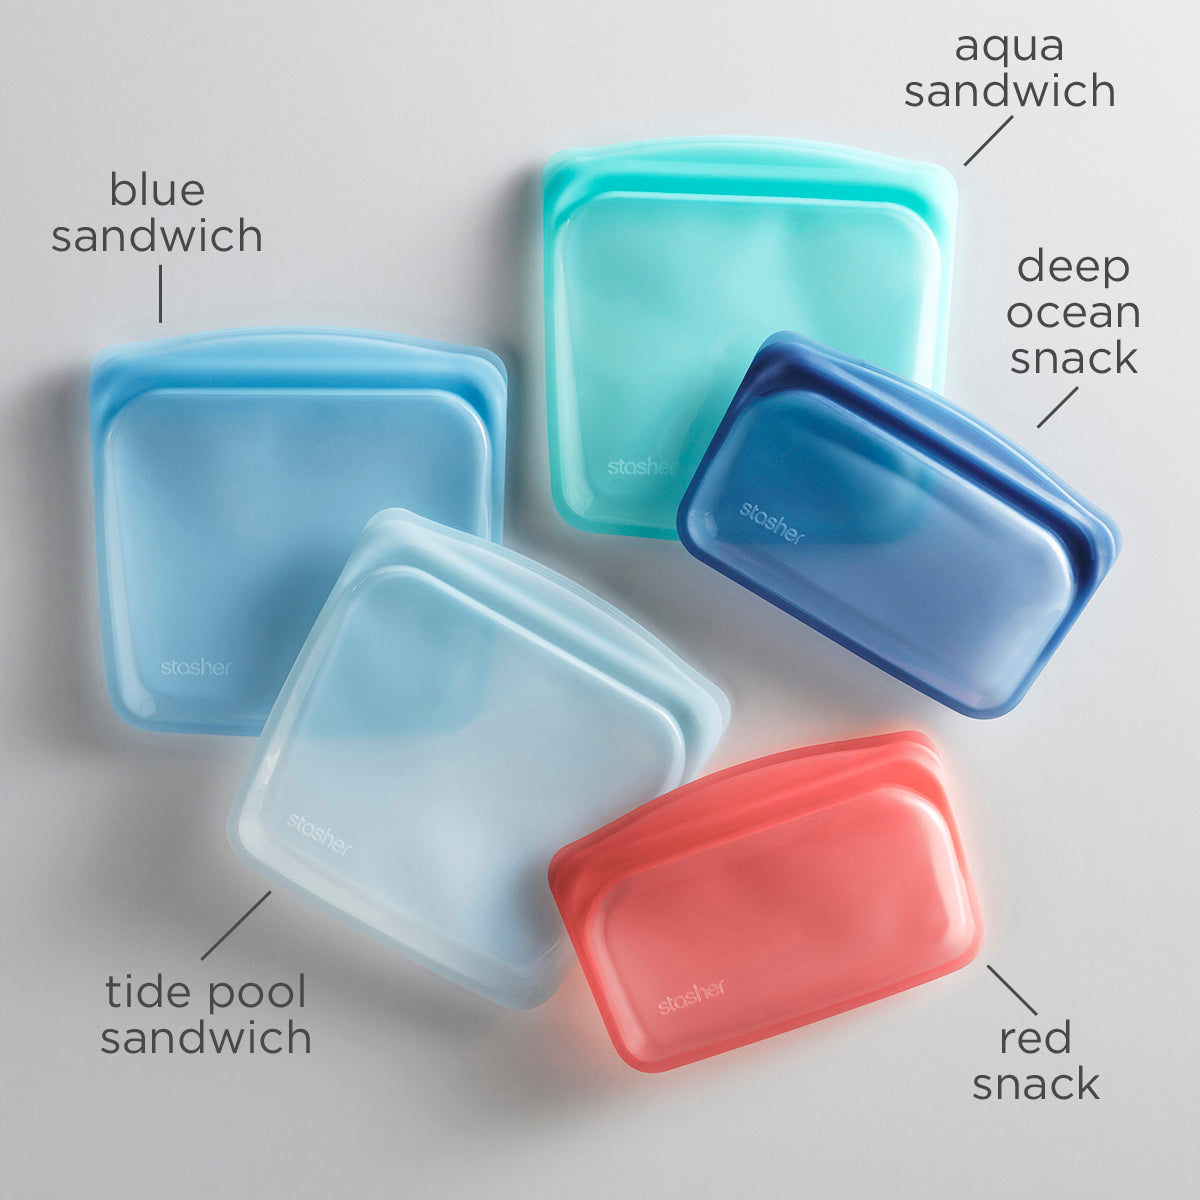 Reusable Silicone Bags - Clean People